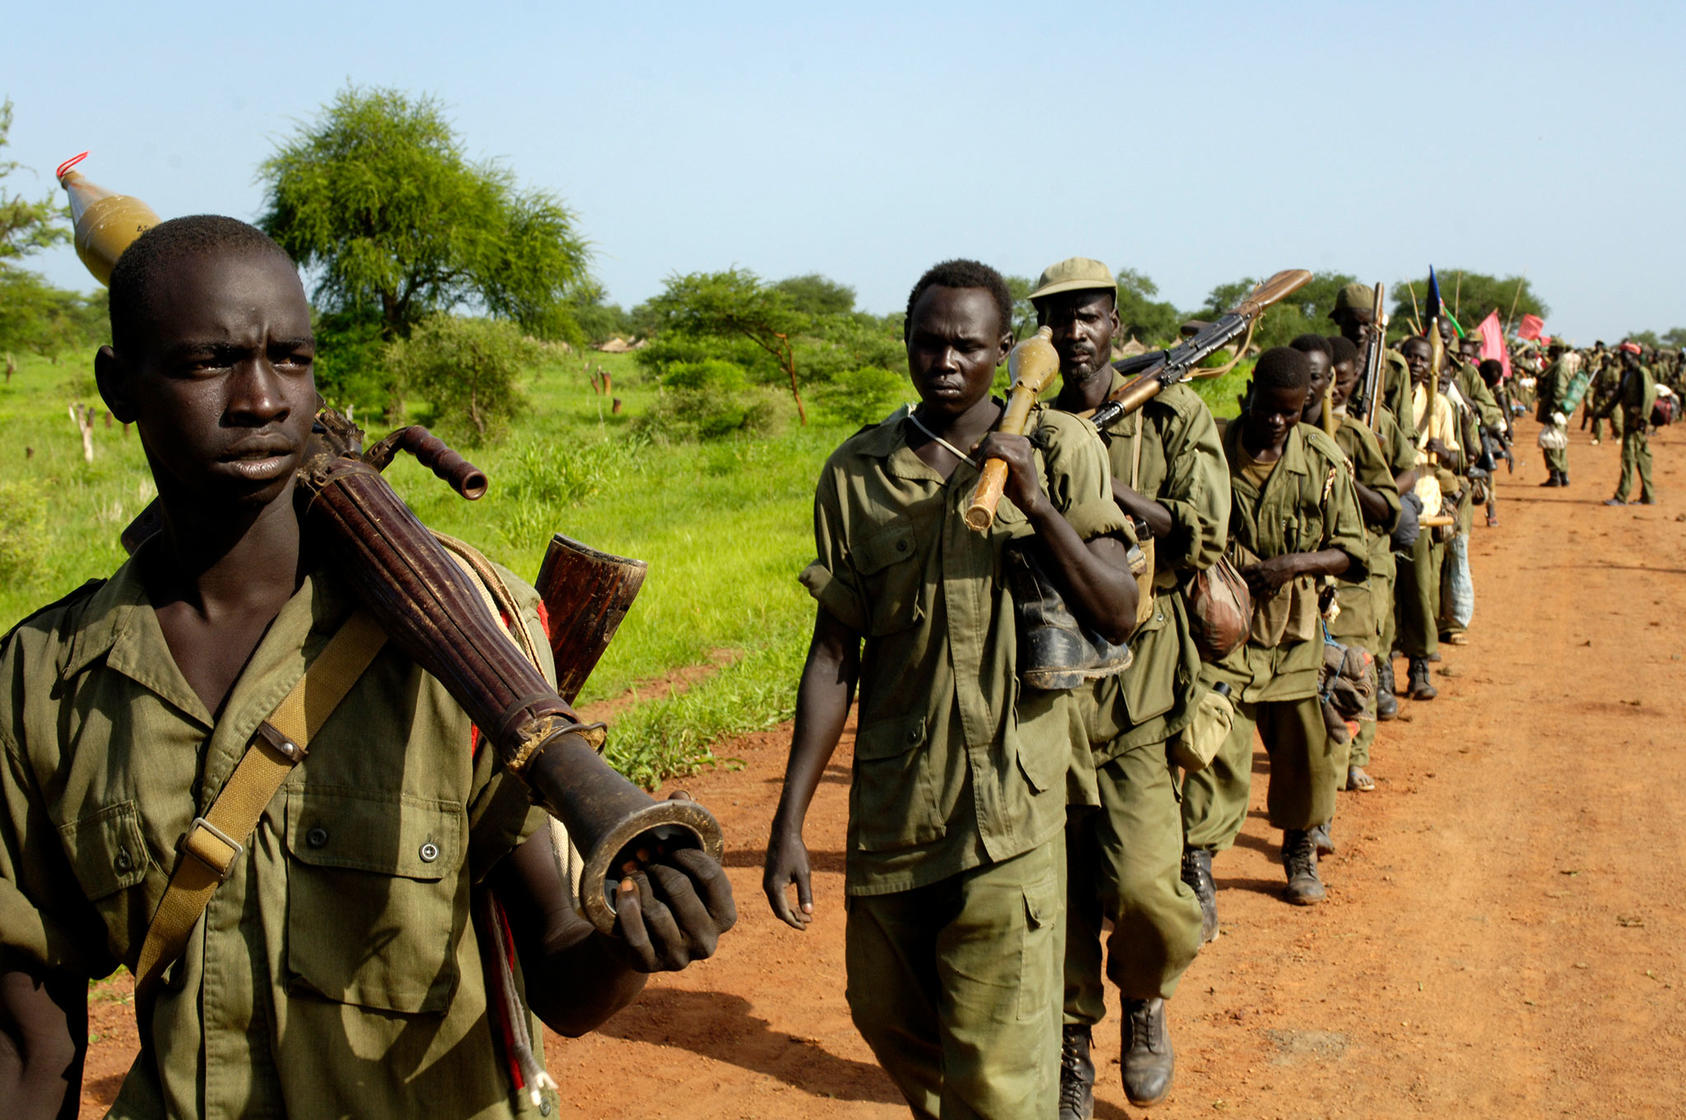 Soldiers of the Sudanese People's Liberation Army